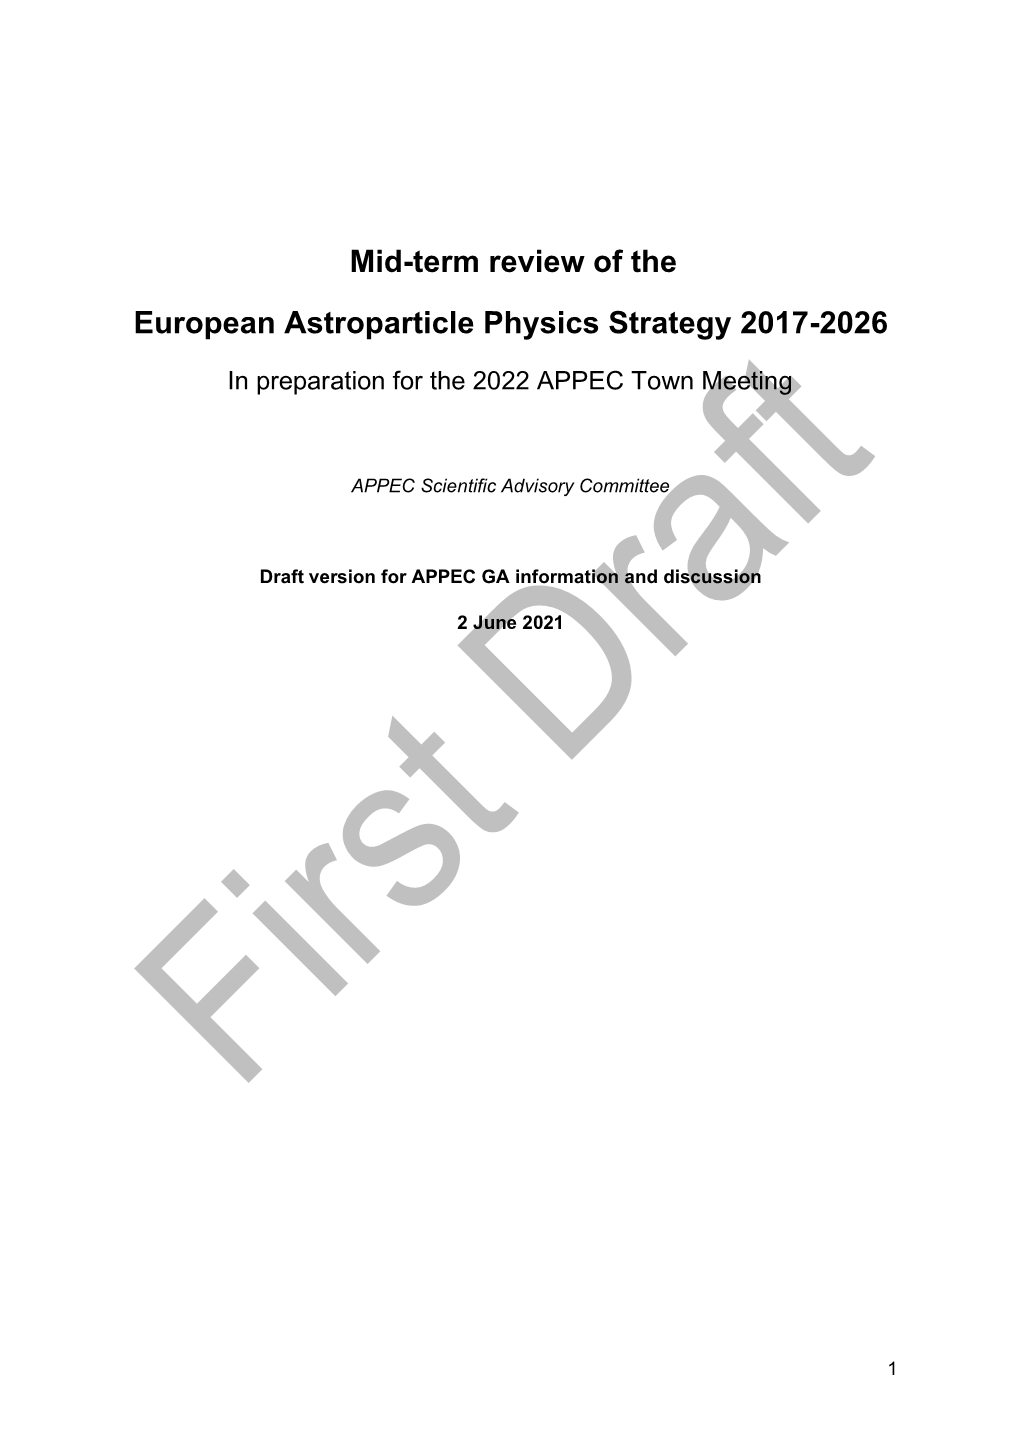 Mid-Term Review of the European Astroparticle Physics Strategy 2017-2026